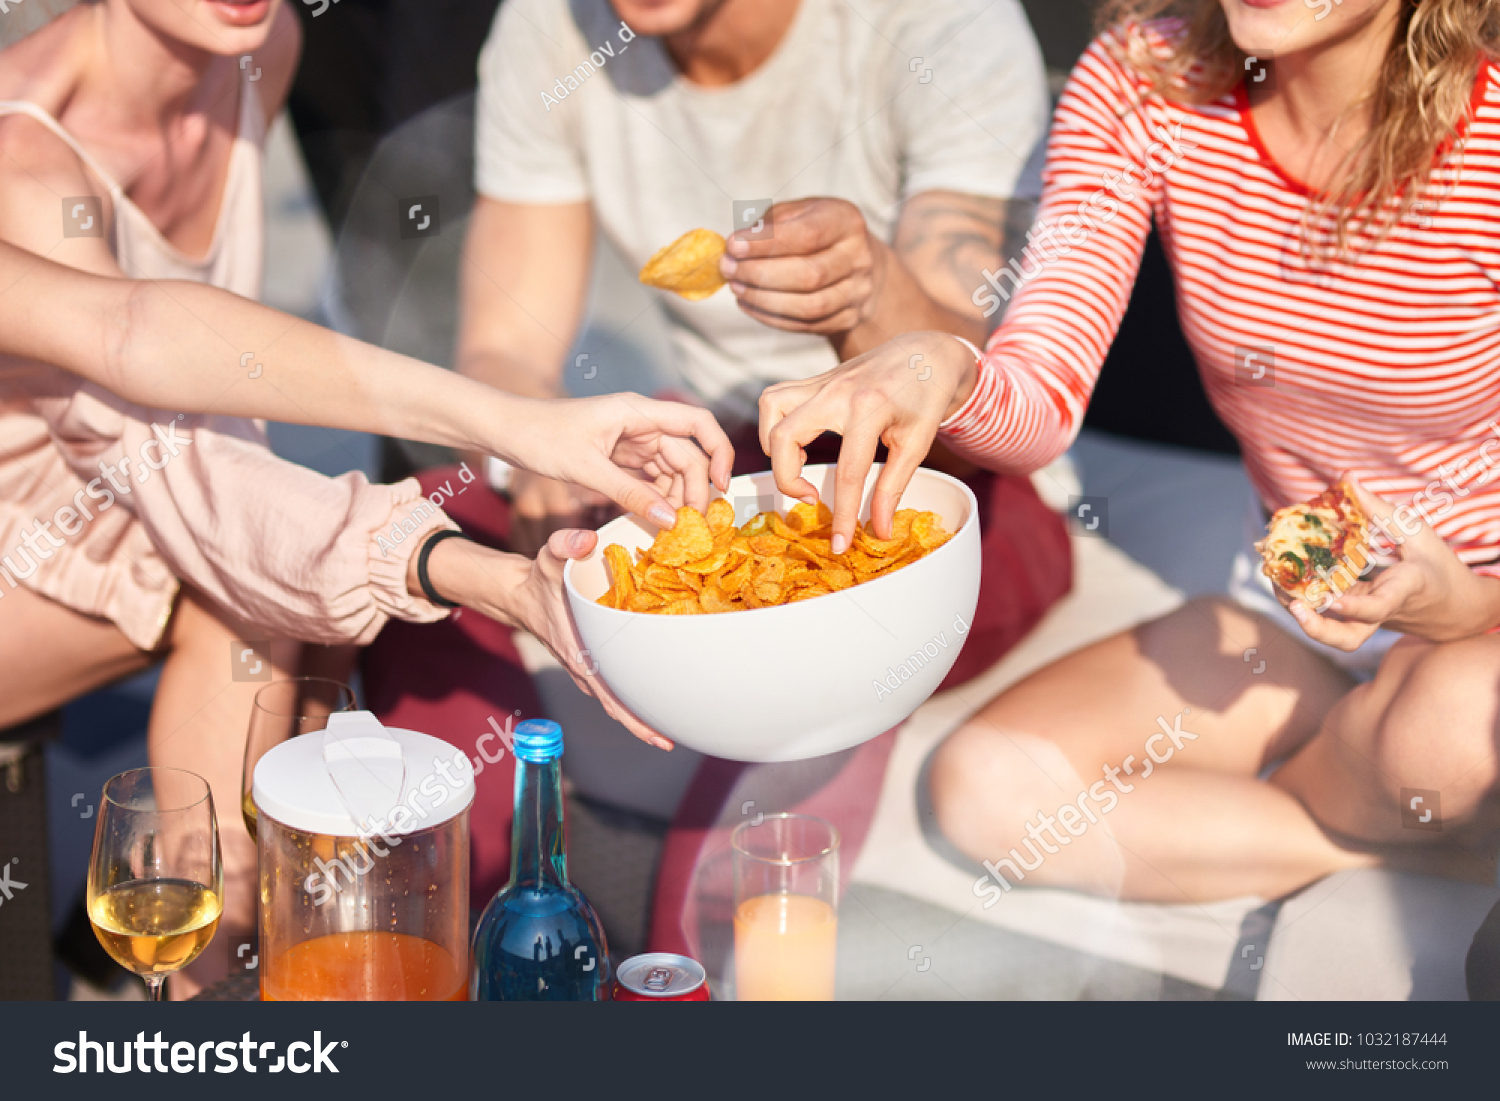 Enjoy it. Close up of bowl with snacks in hands of a young woman holding it while sharing with her friends #1032187444